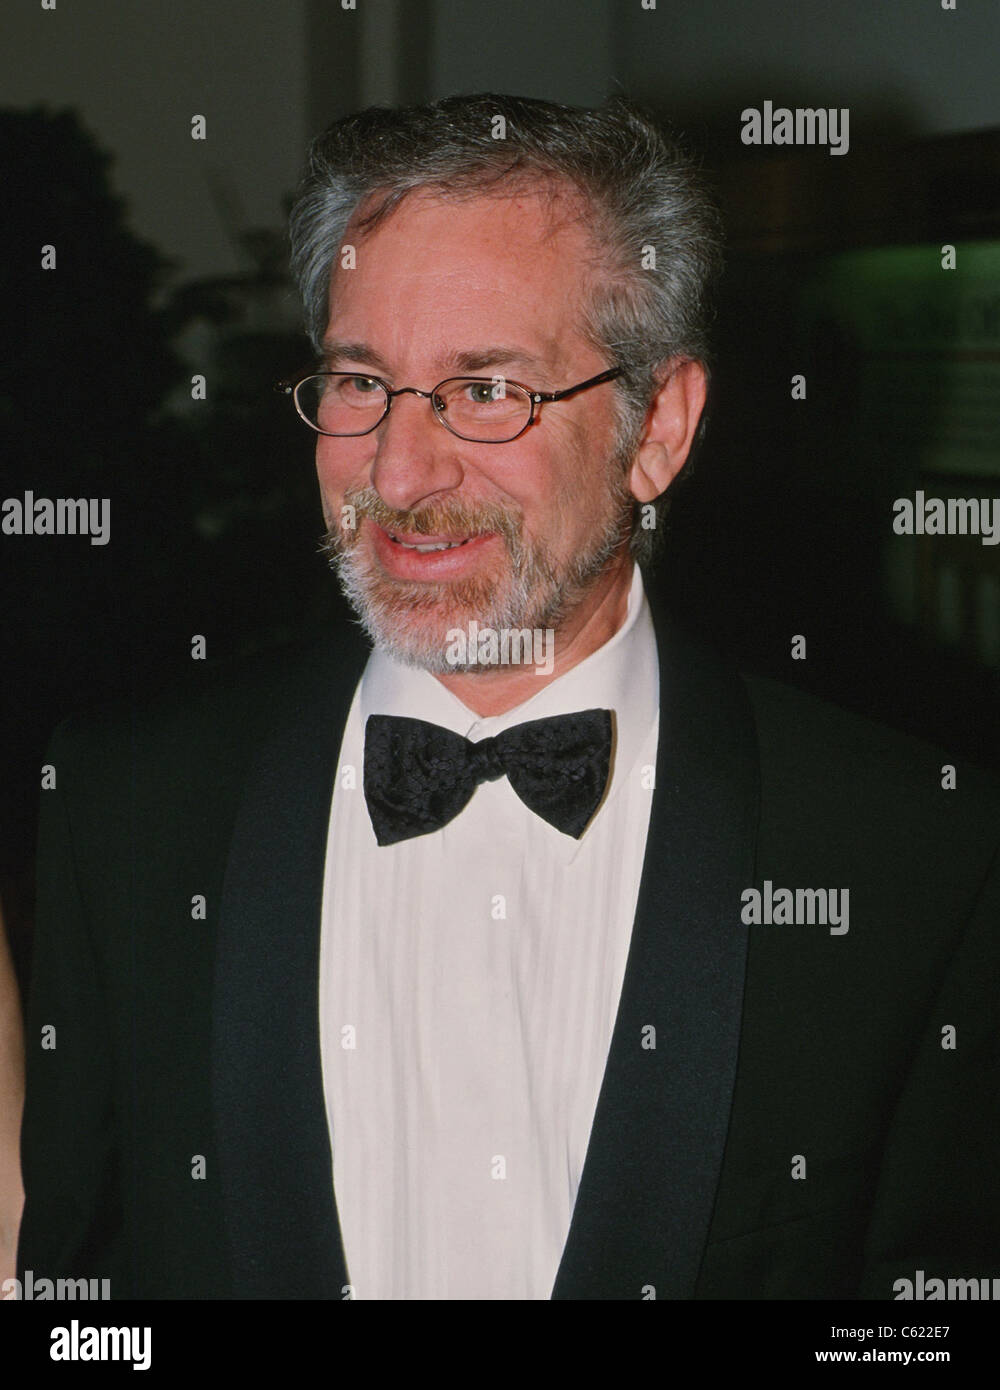 Movie producer Steven Spielberg at the White House Stock Photo